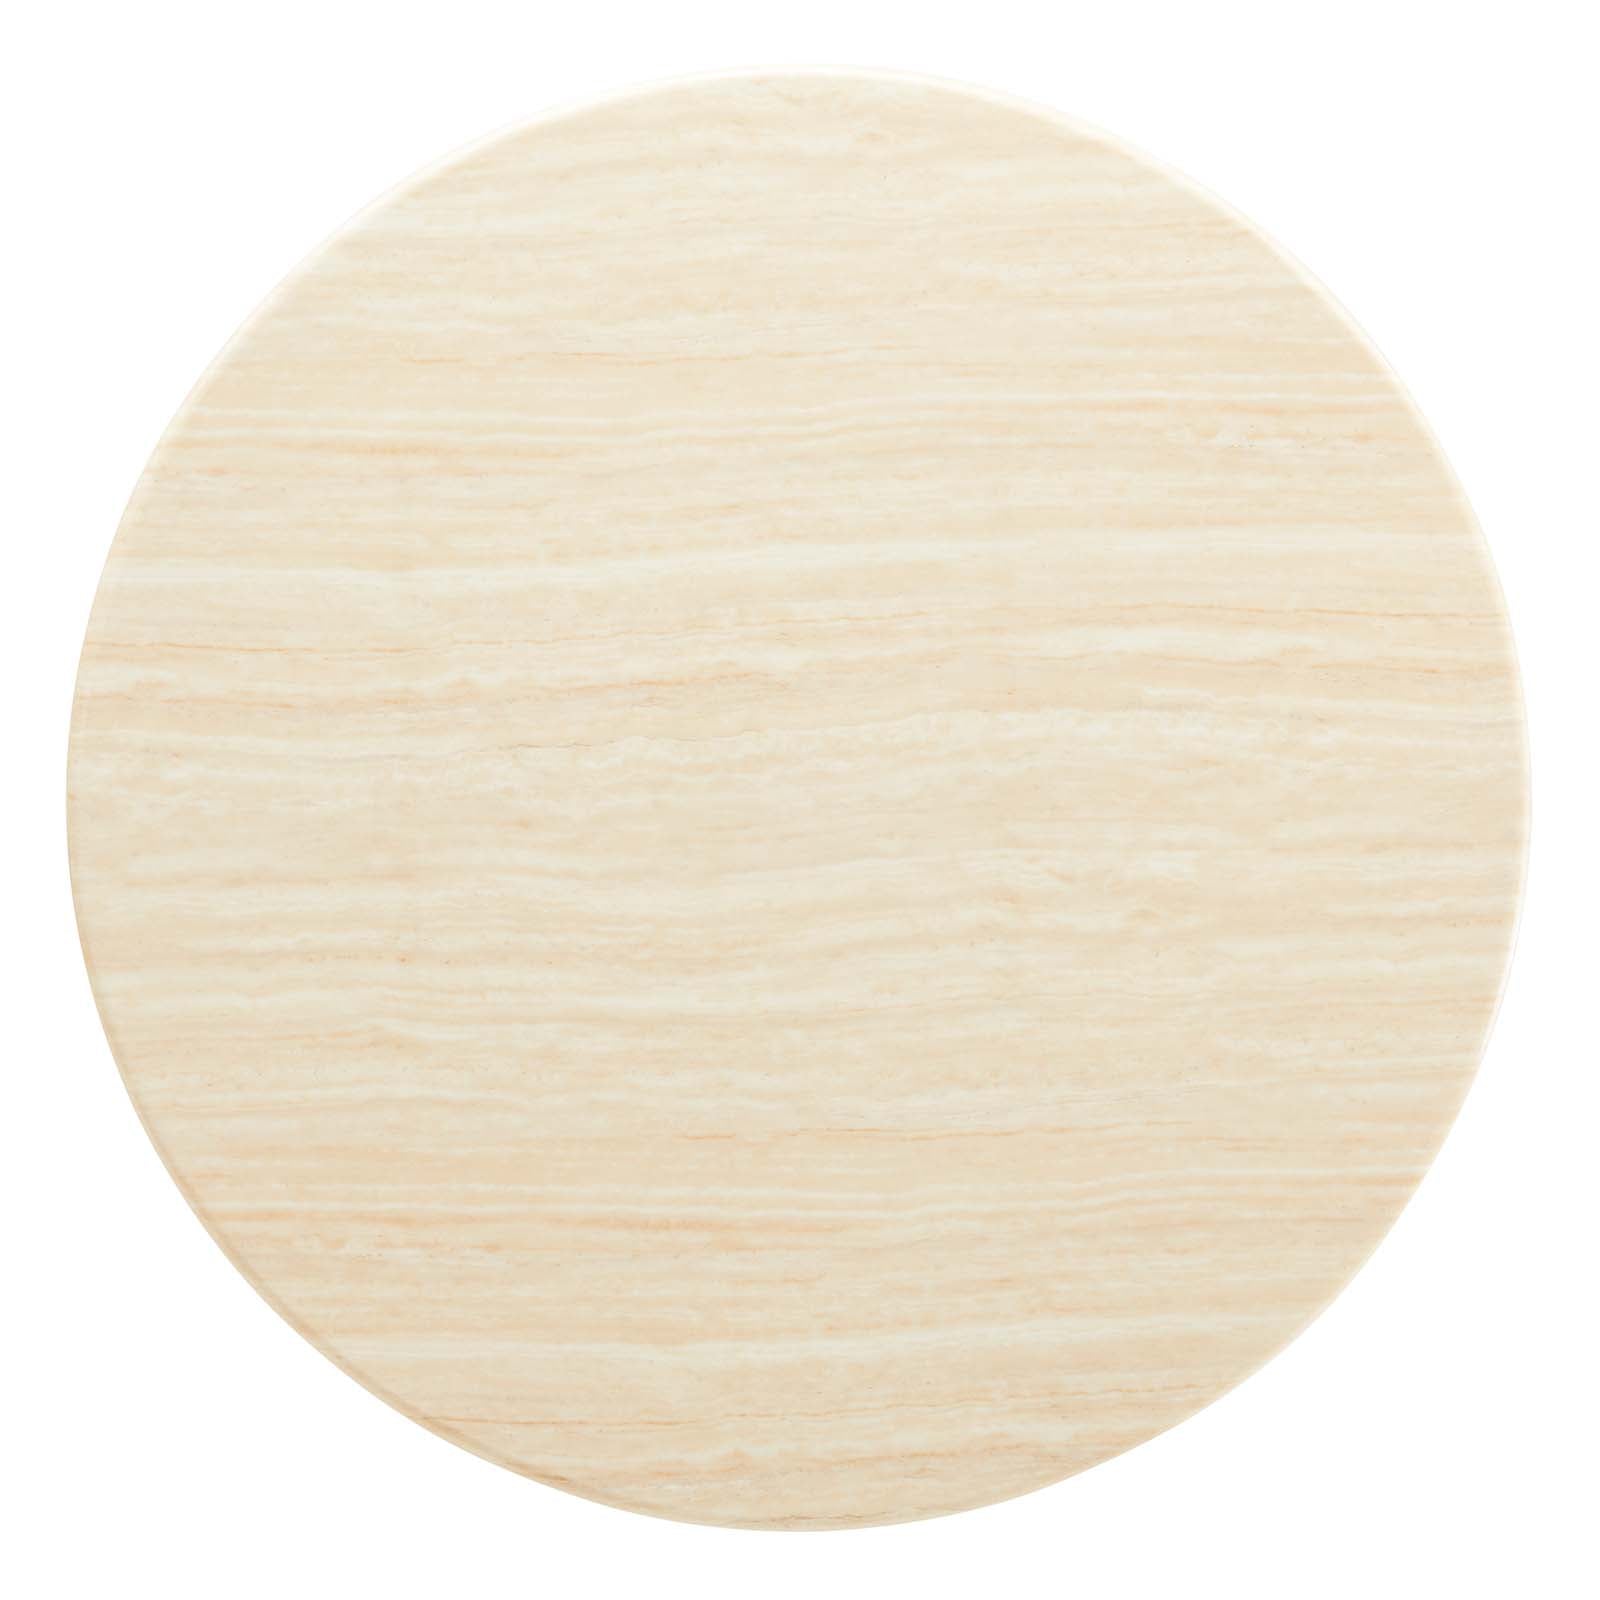 Lippa 48" Round Artificial Travertine Dining Table-Dining Table-Modway-Wall2Wall Furnishings